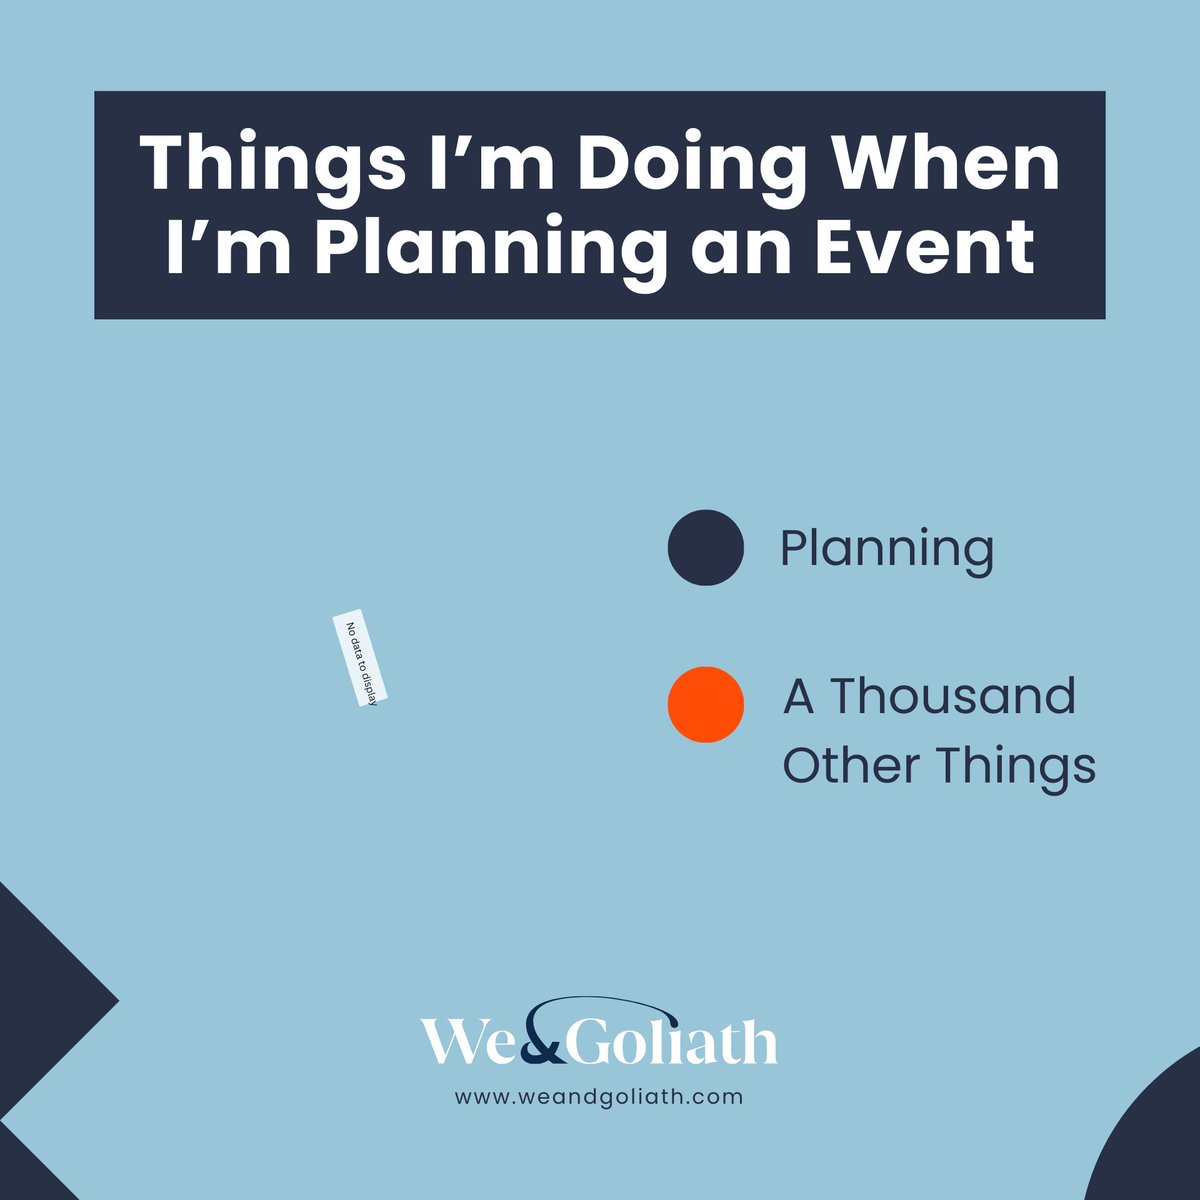 Download Our Free Event Playbook!
visit.weandgoliath.com/playbook
#HybridEvents #MarketingStrategy